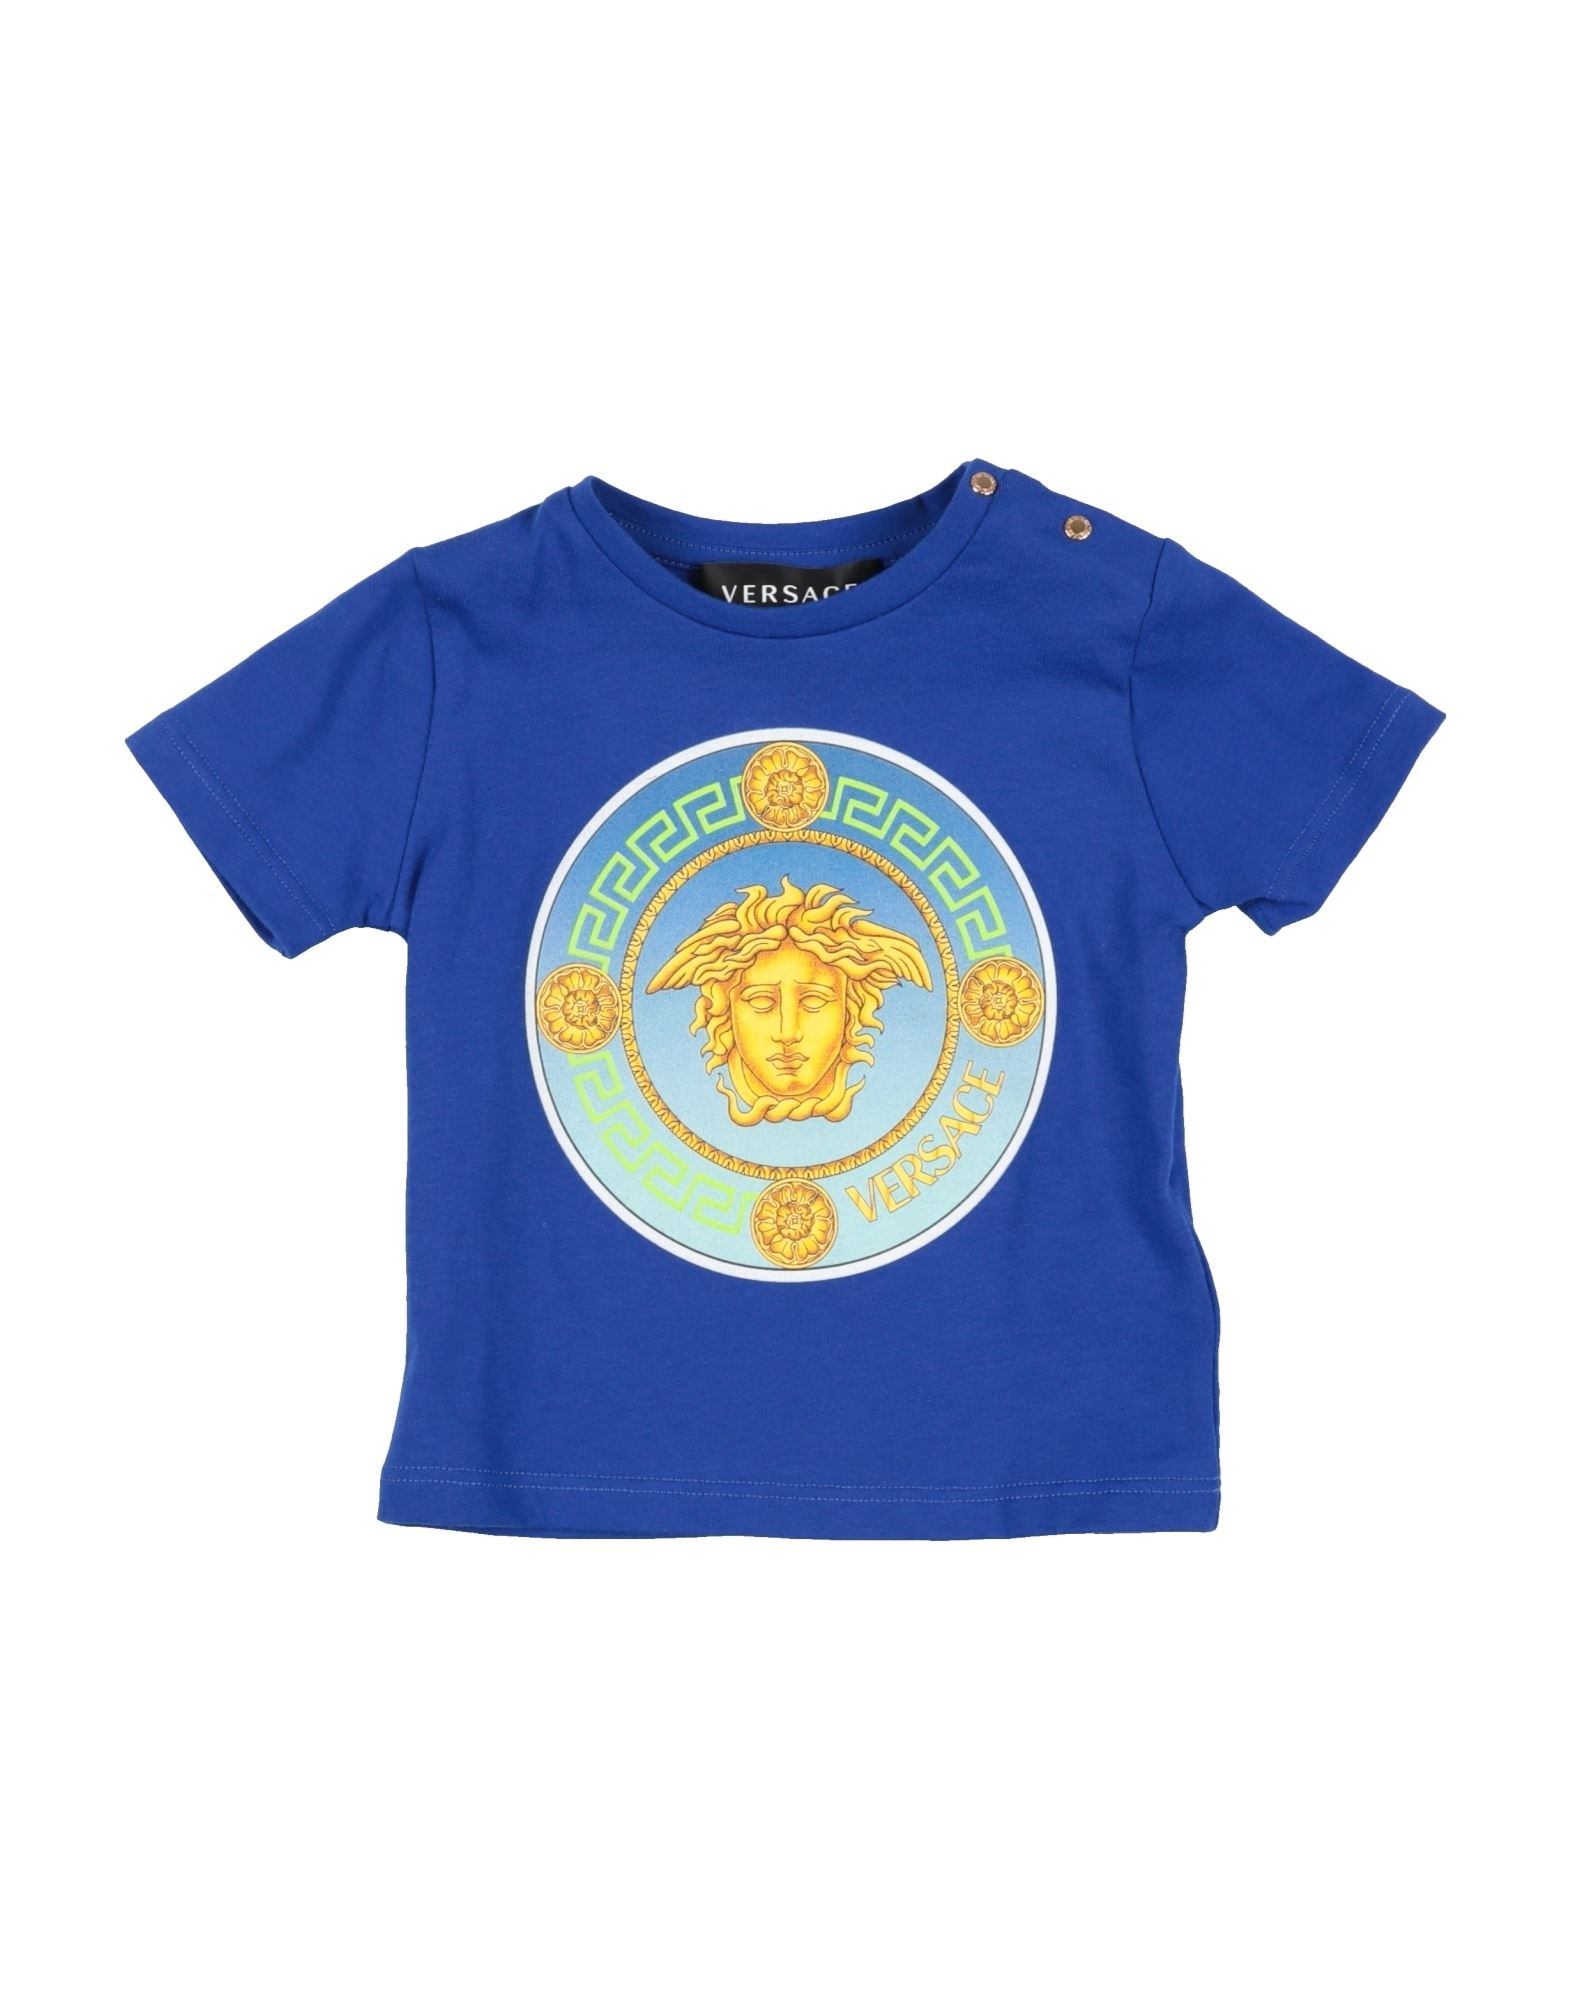 VERSACE YOUNG T-shirts Kinder Blau von VERSACE YOUNG